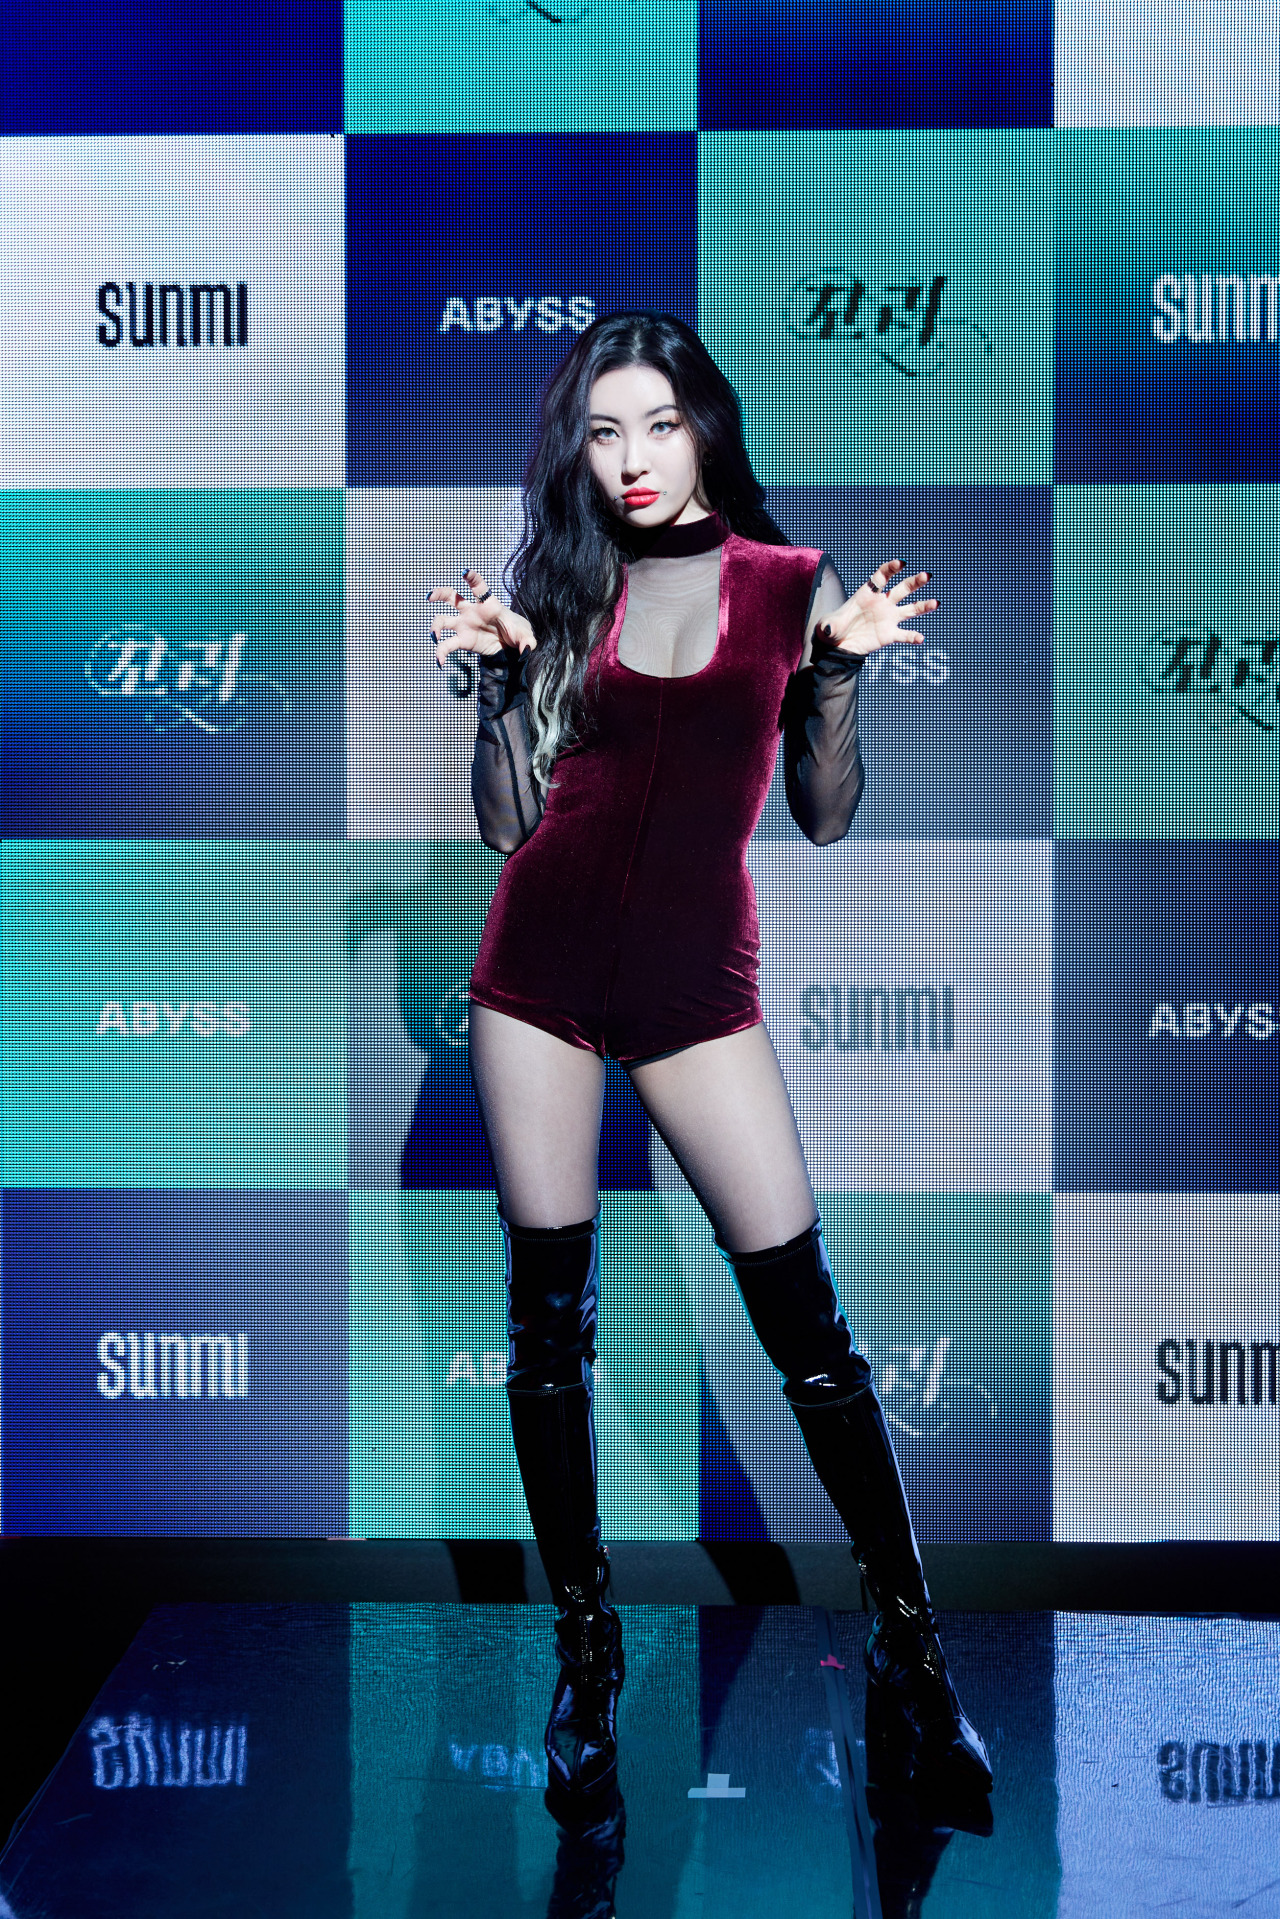 Sunmi poses for picture before press conference conducted in Seoul on Tuesday. (Abyss Company)